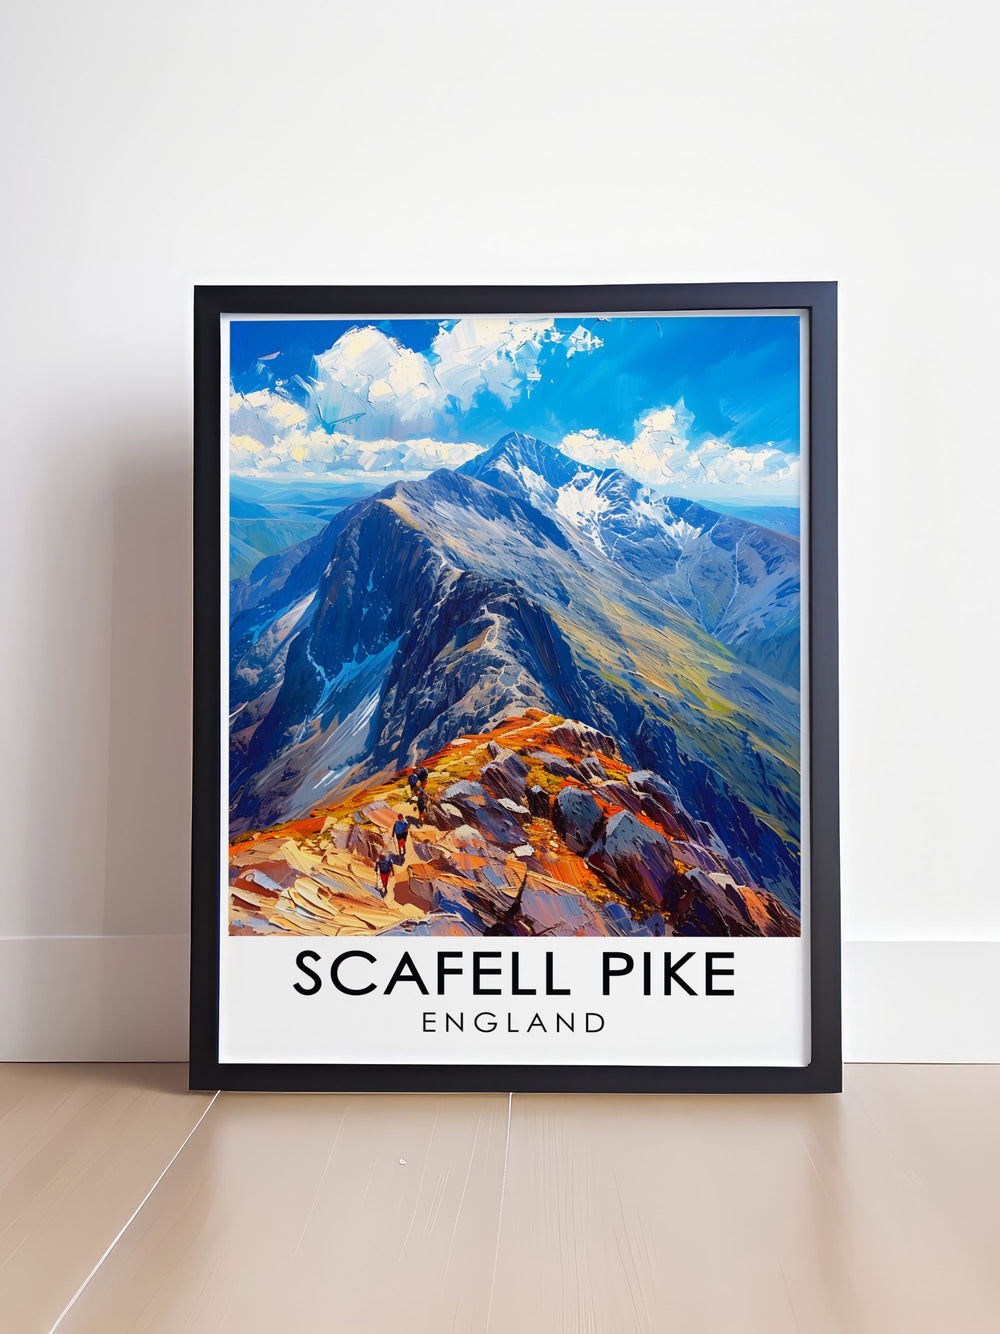 Stunning depiction of Scafell Pike in the Lake District, offering a breathtaking view from the summit. Ideal for travel posters, mountain wall art, and England themed home decor.